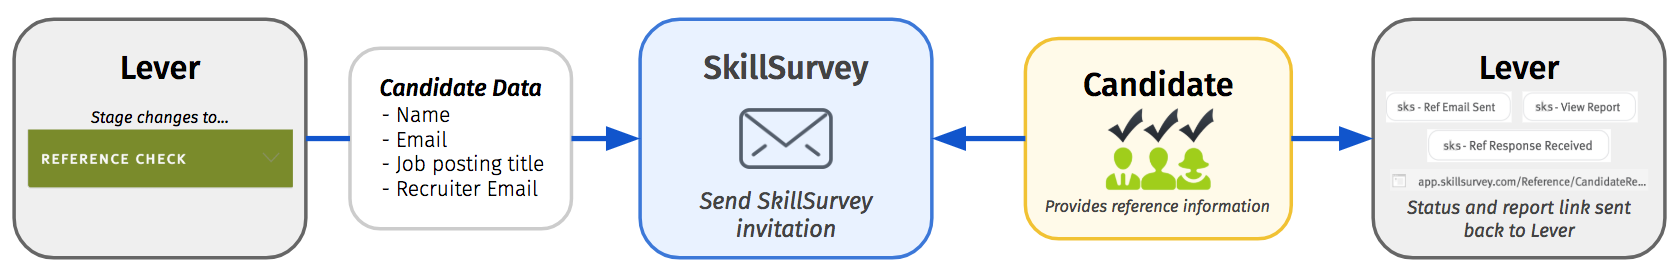 Infographic depicting the workflow between SkillSurvey and Lever